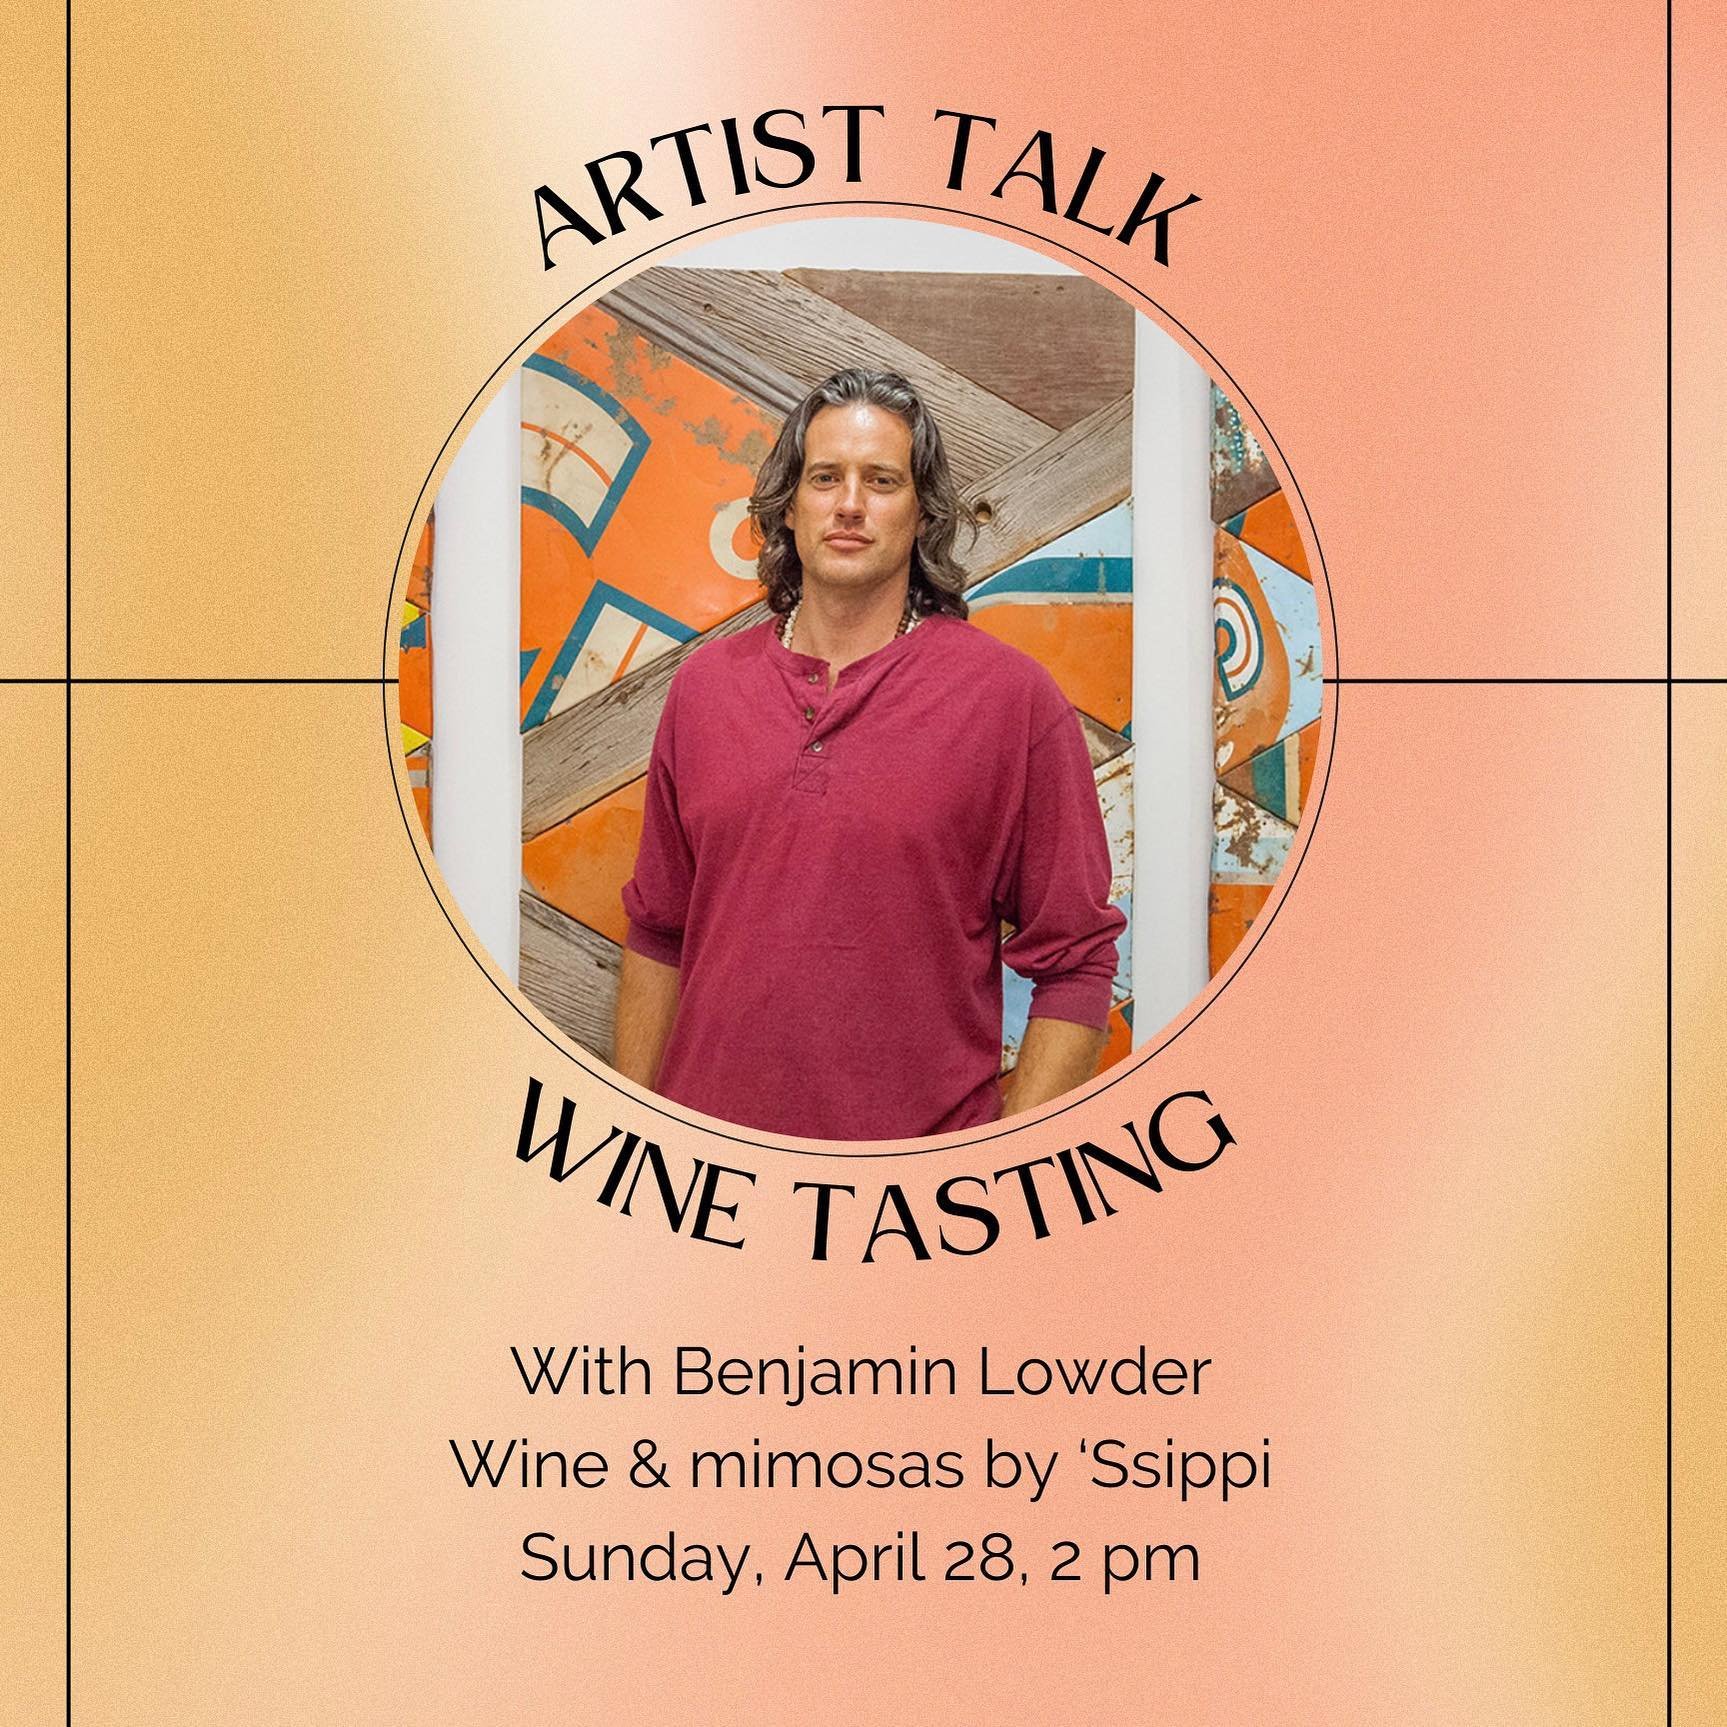 Tomorrow at 2 PM! Don&rsquo;t miss Benjamin Lowder&rsquo;s artist talk, with wine and mimosas by @ssippi_stl ! Be sure to head next door to &lsquo;Ssippi afterwards to continue the fun. See you all then! #untitledfineart #artisttalk #winetasting #stl